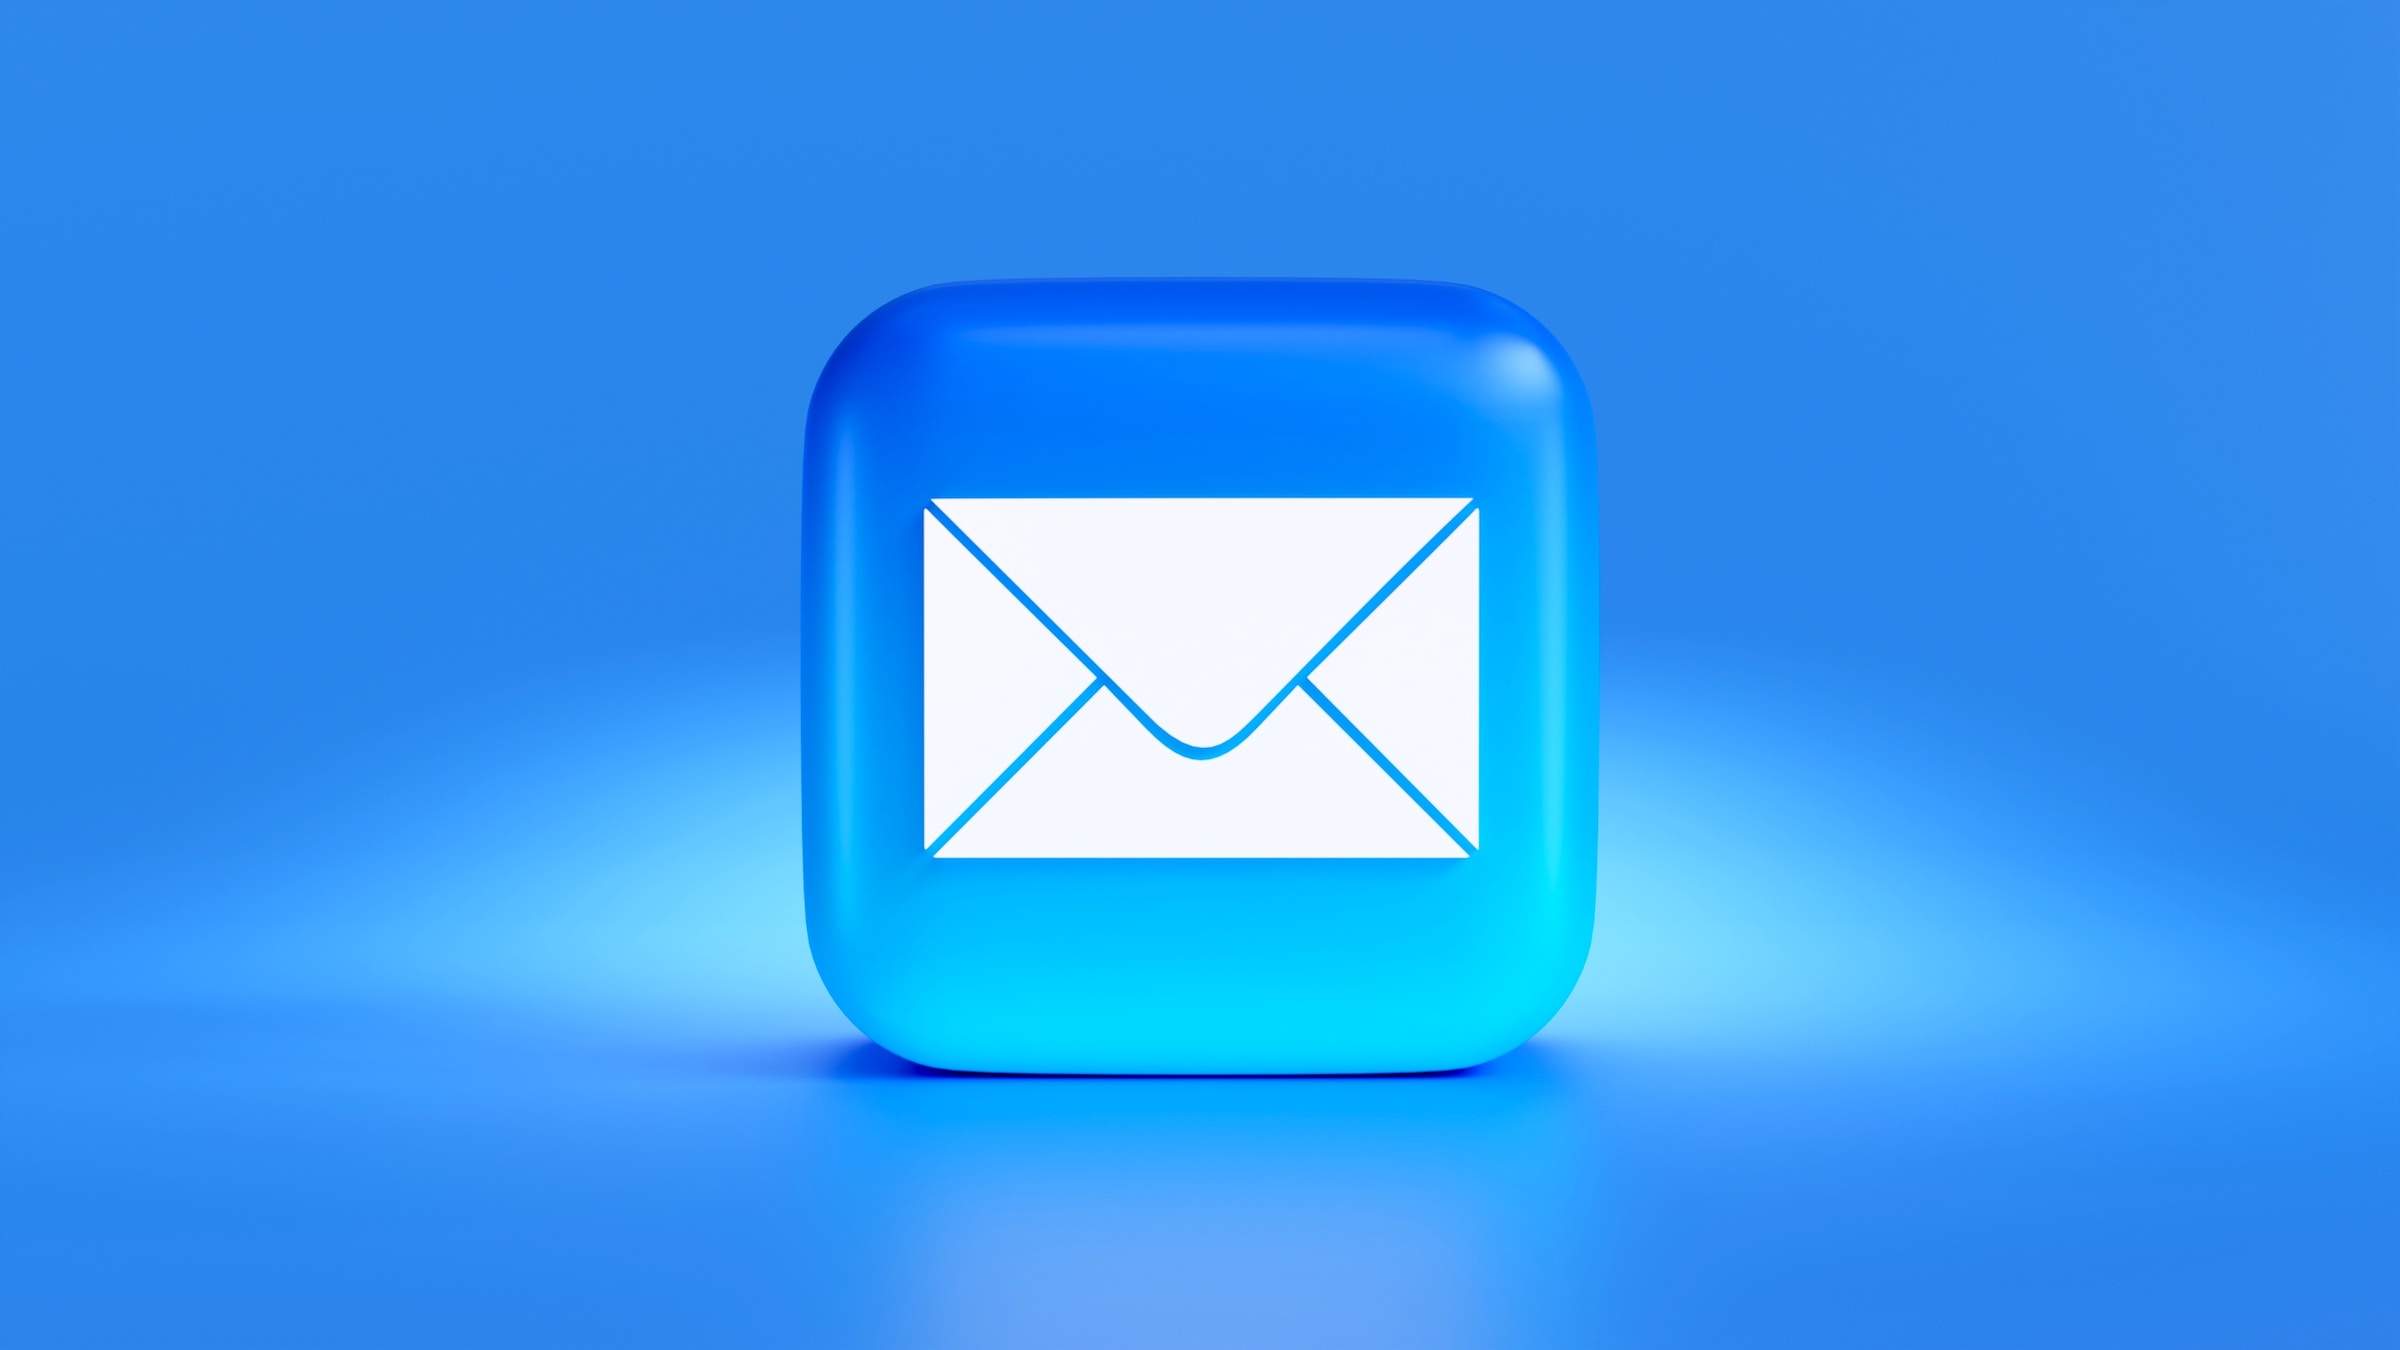 email logo on a blue dice